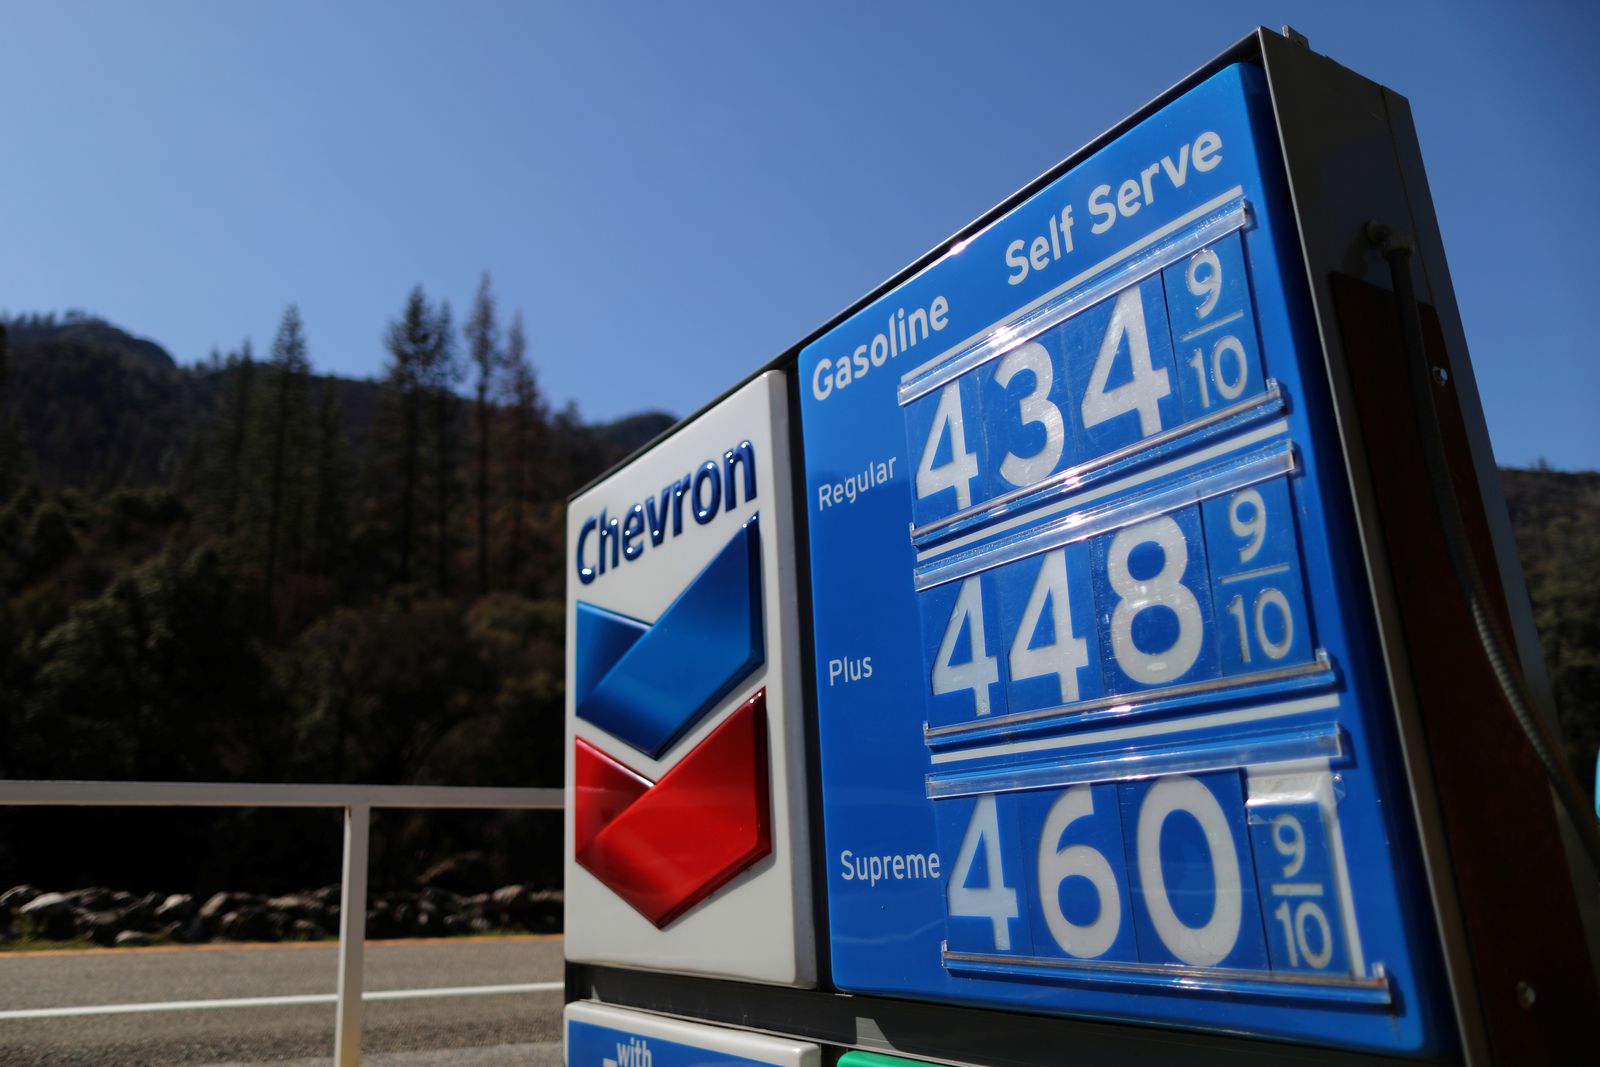 Explainer Why Gas Prices Go Up (And How to Keep Them Low) The